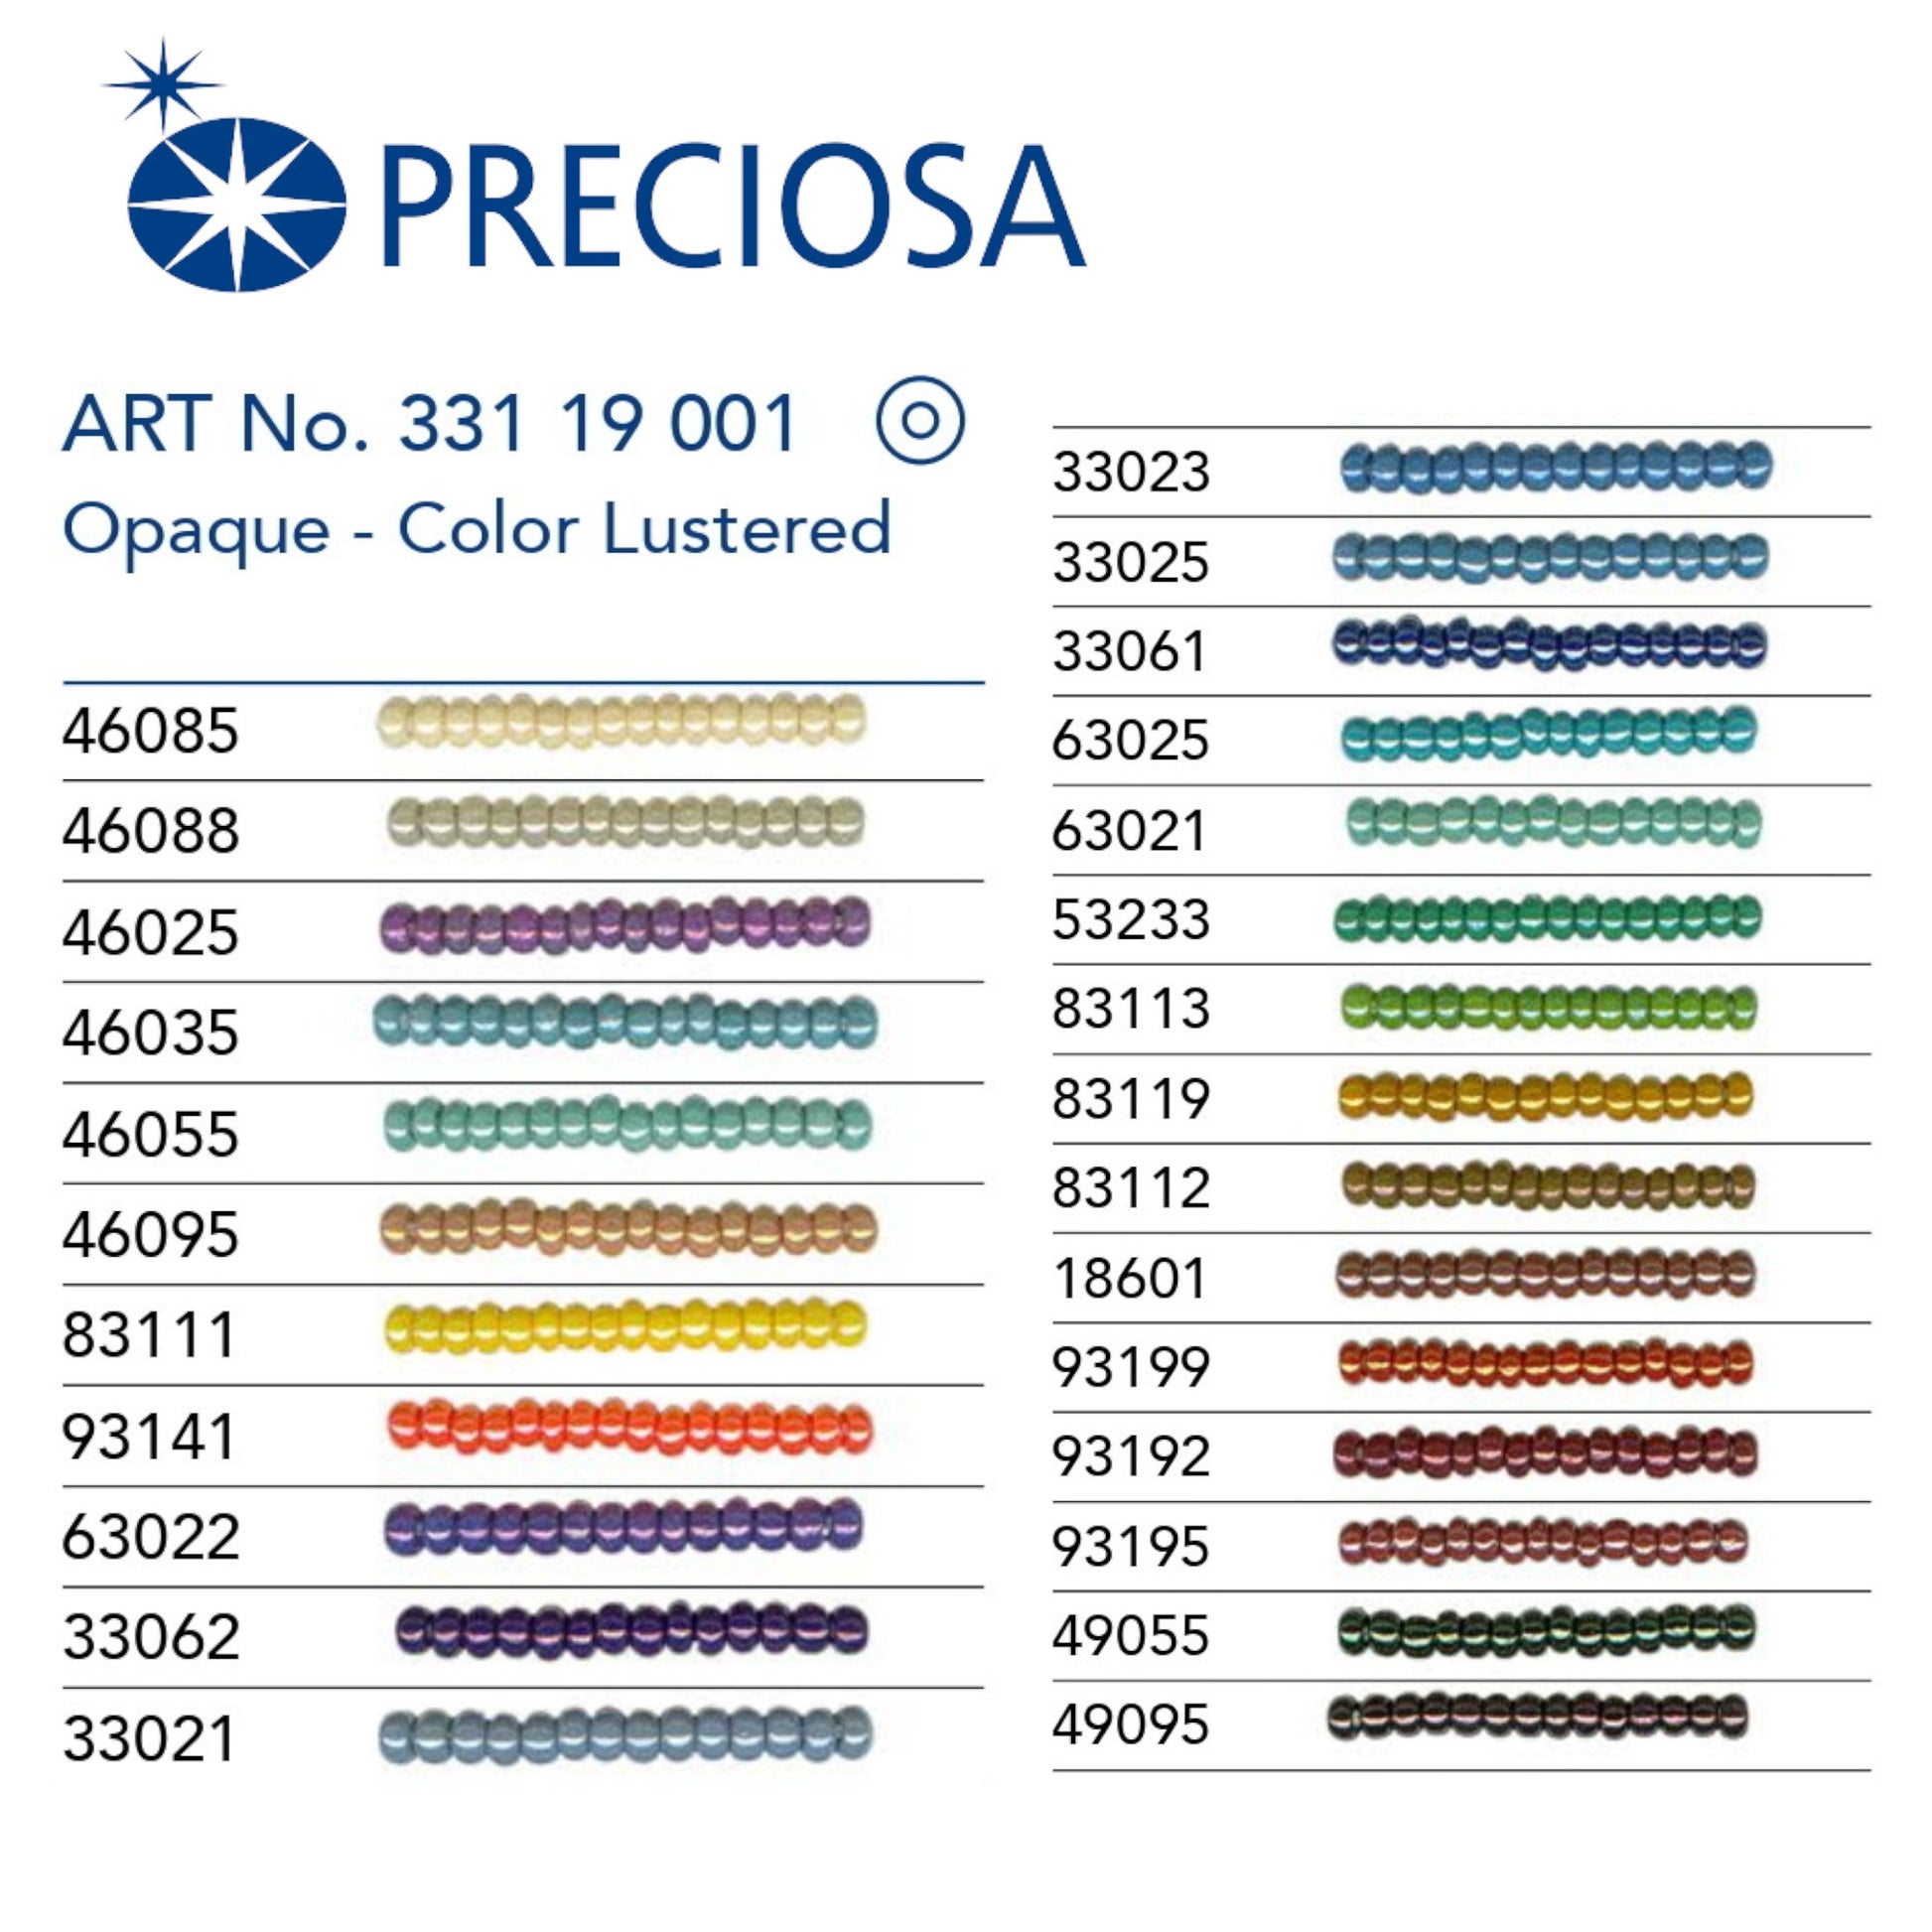 46095 Czech Seed Beads Preciosa Rocailes Opaque - Color Lustered - VadymShop